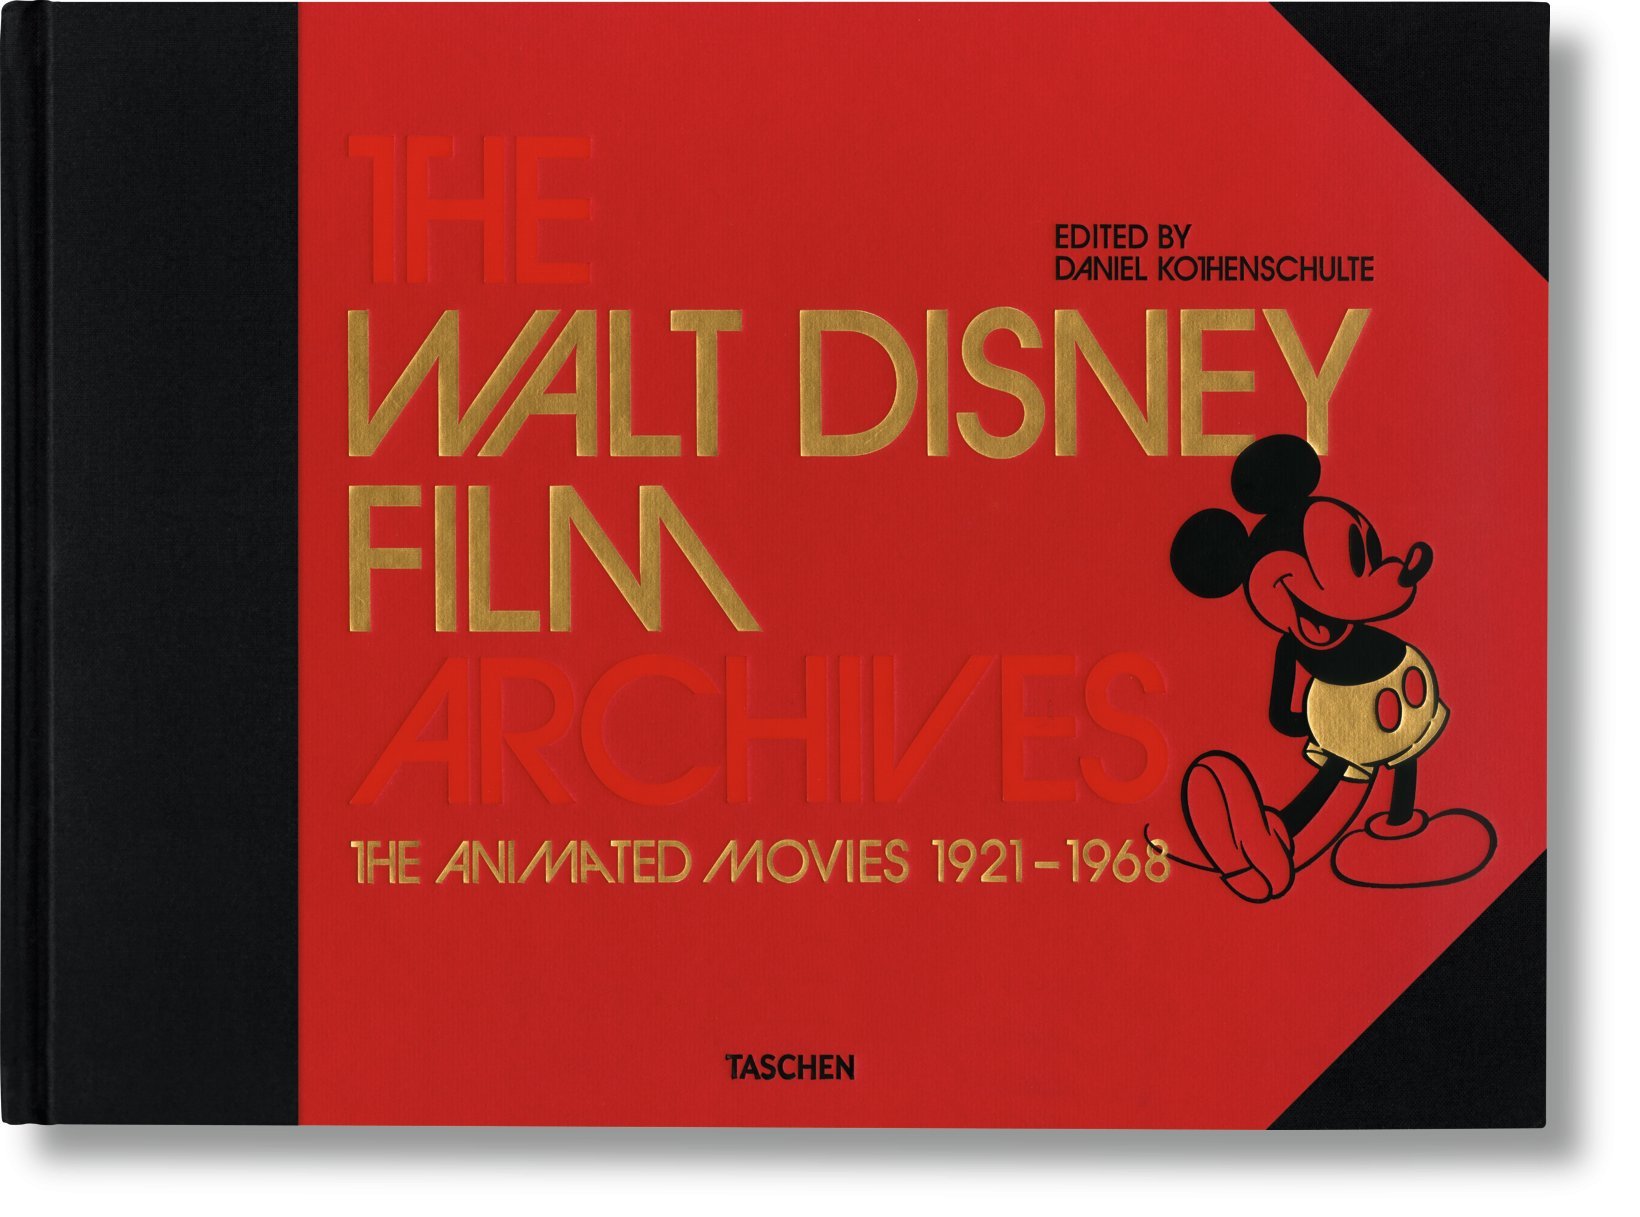  The Walt Disney Film Archives. The Animated Movies 1921–1968 